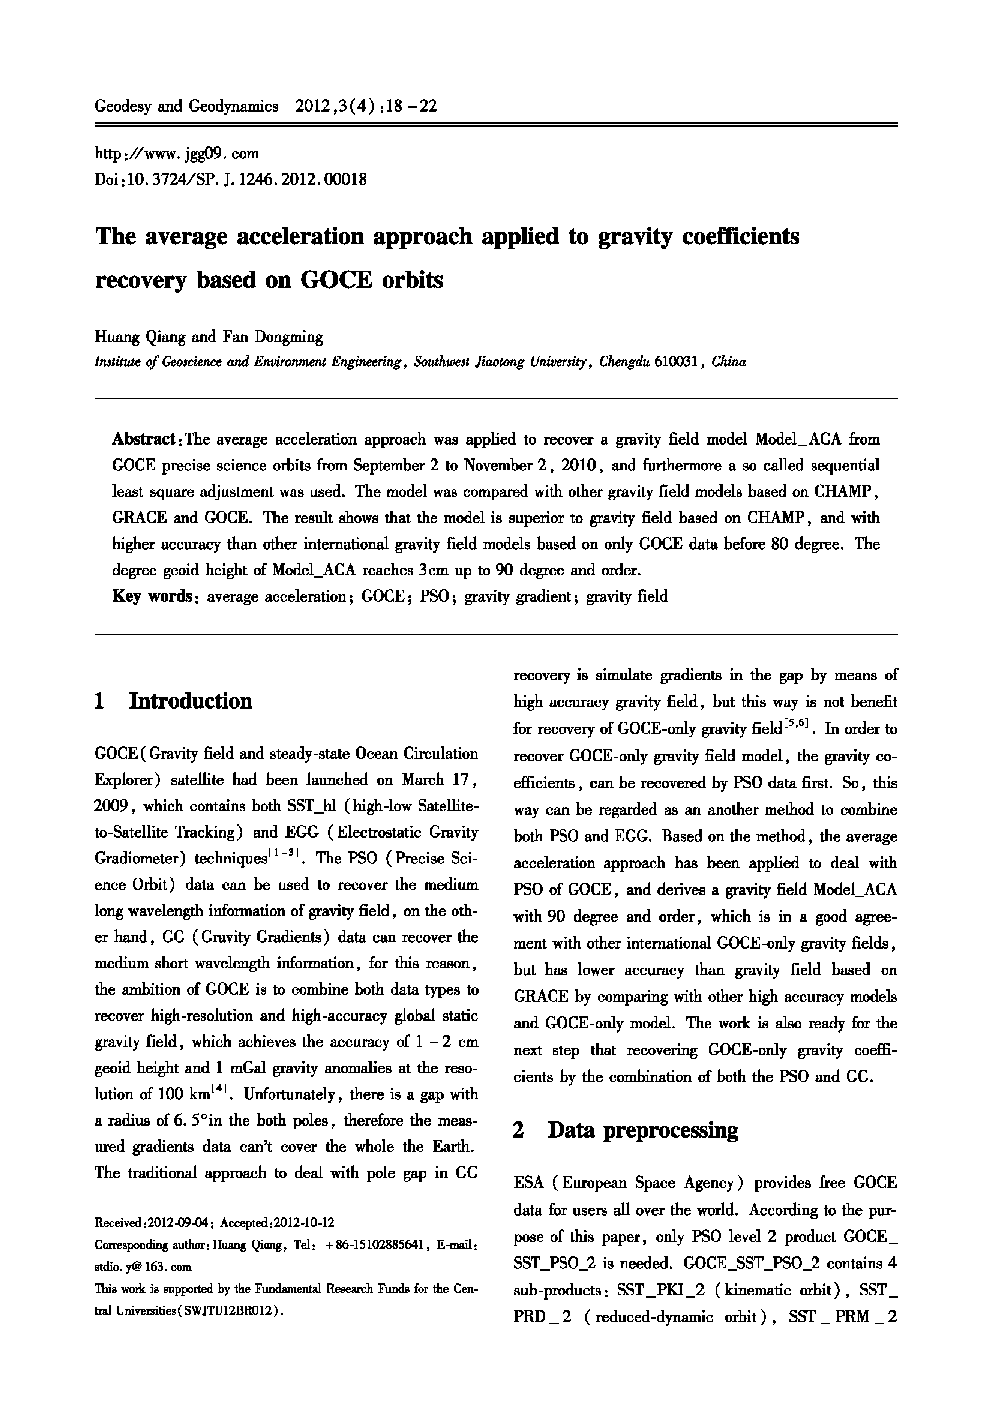 The average acceleration approach applied to gravity coefficients recovery based on GOCE orbits 